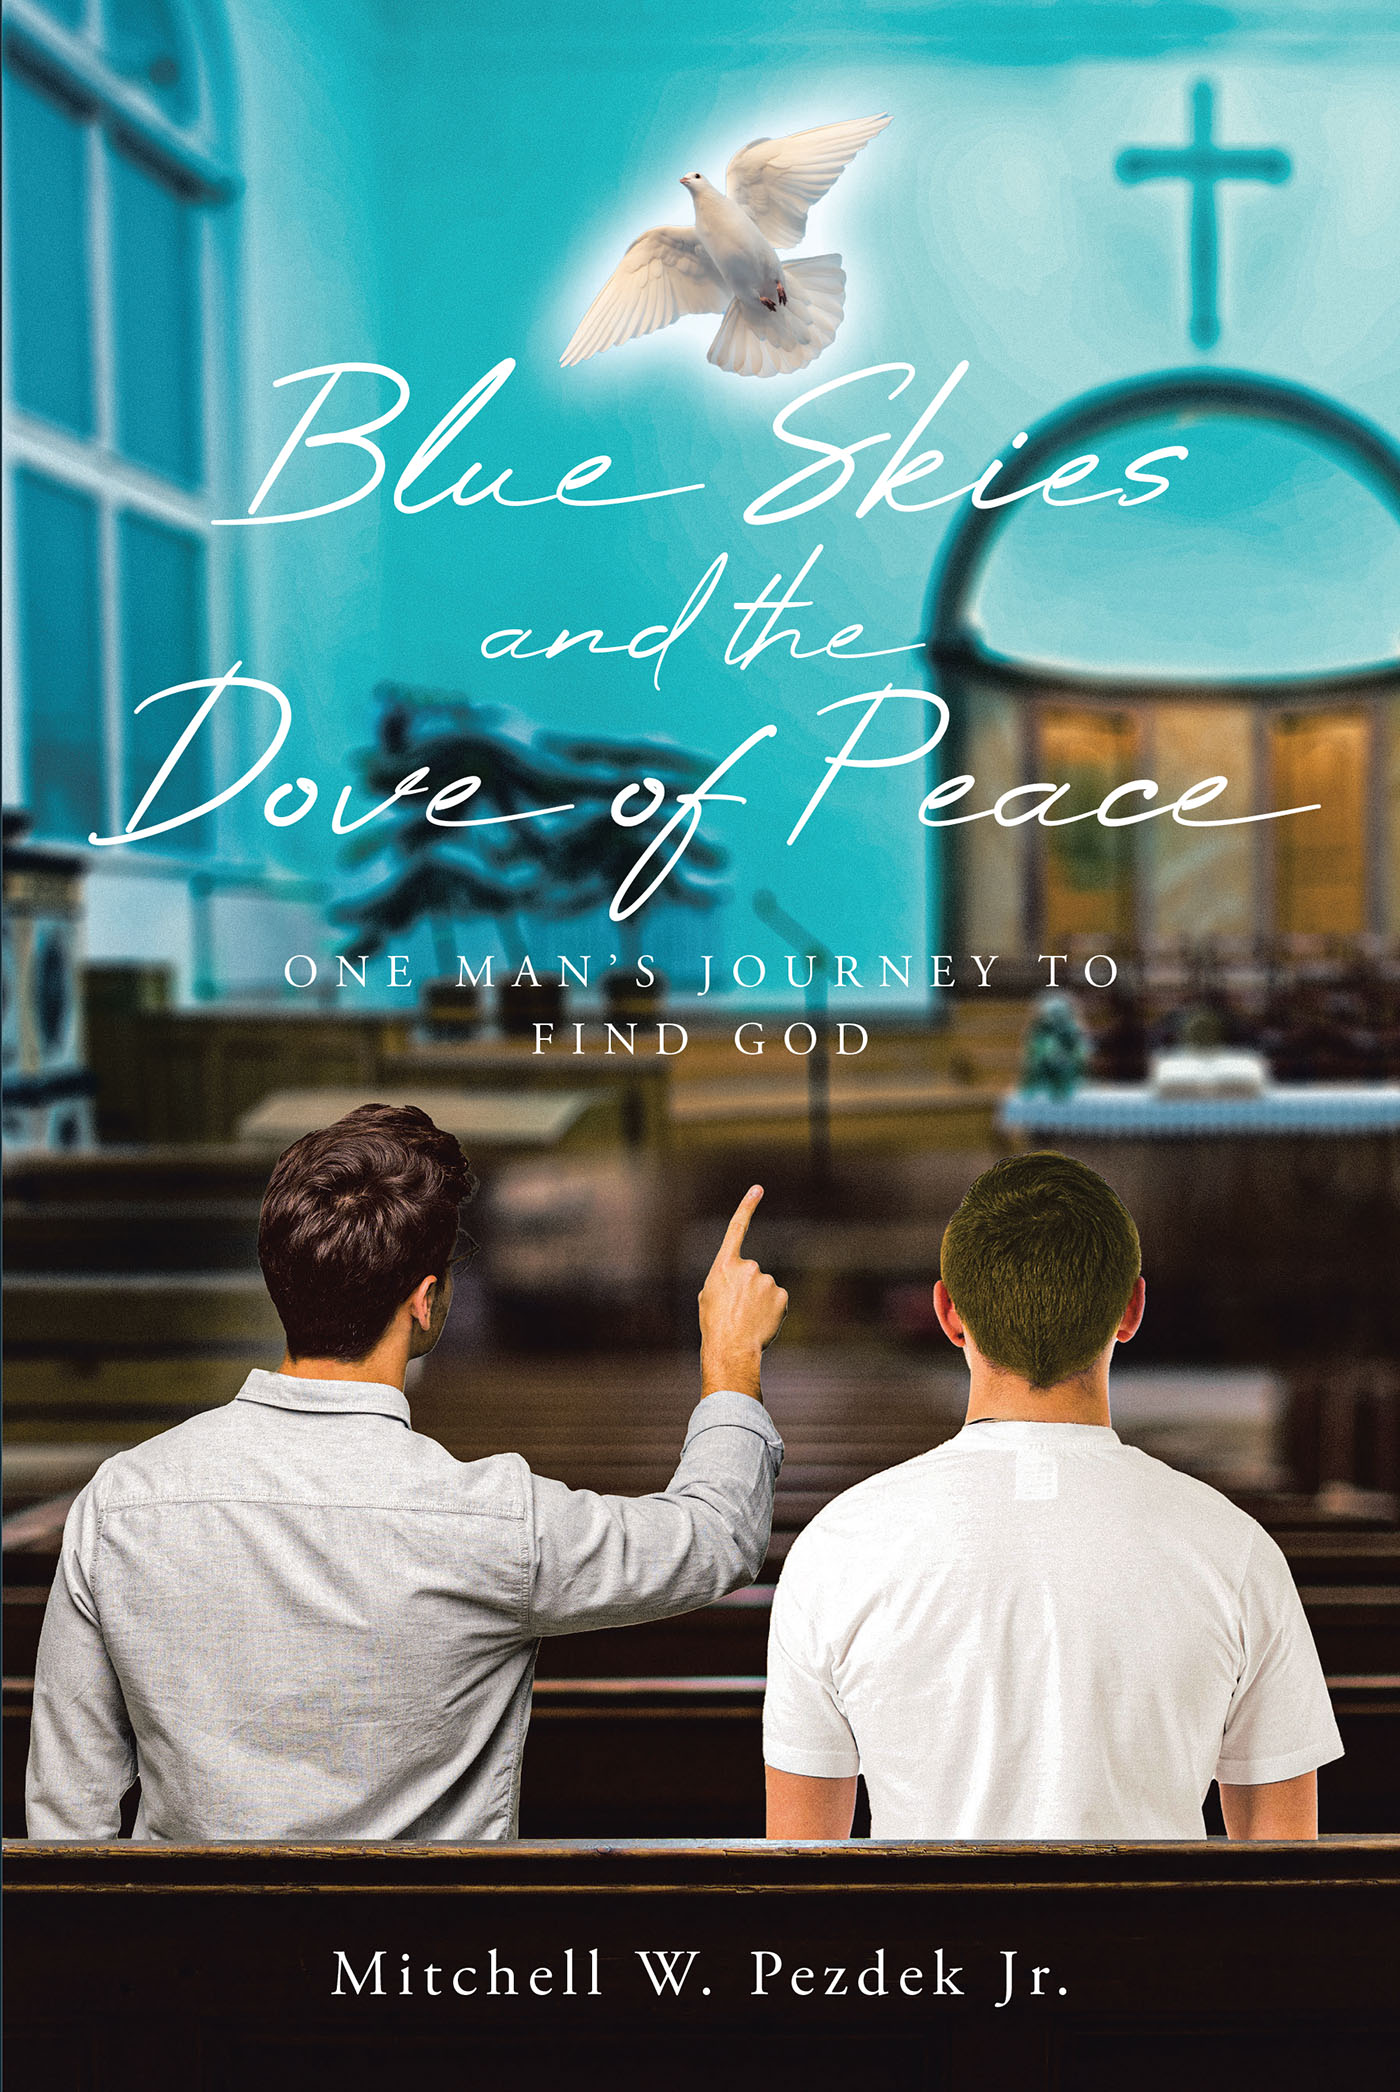 Mitchell W. Pezdek Jr.’s Newly Released “Blue Skies and the Dove of Peace: One Man’s Journey to Find God” is an Uplifting Message of Faith